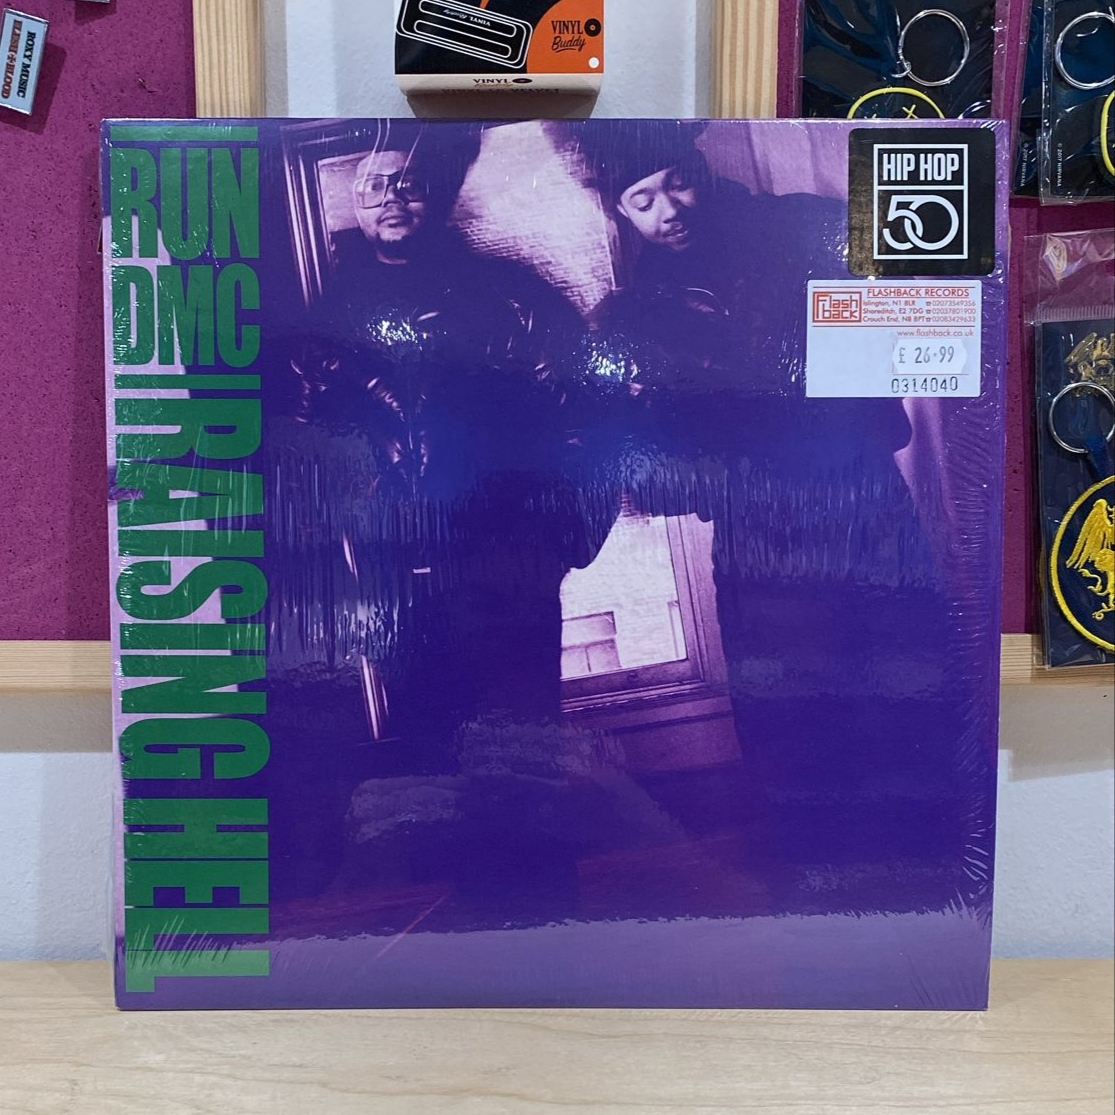 On May 15, 1986, RUN DMC's 'Raising Hell' was released, marking a significant milestone in hip-hop history, a triumph for the influential rap pioneers.

#rundmc #hiphop #recordshop #music #vinyl #flashback #flashbackrecords